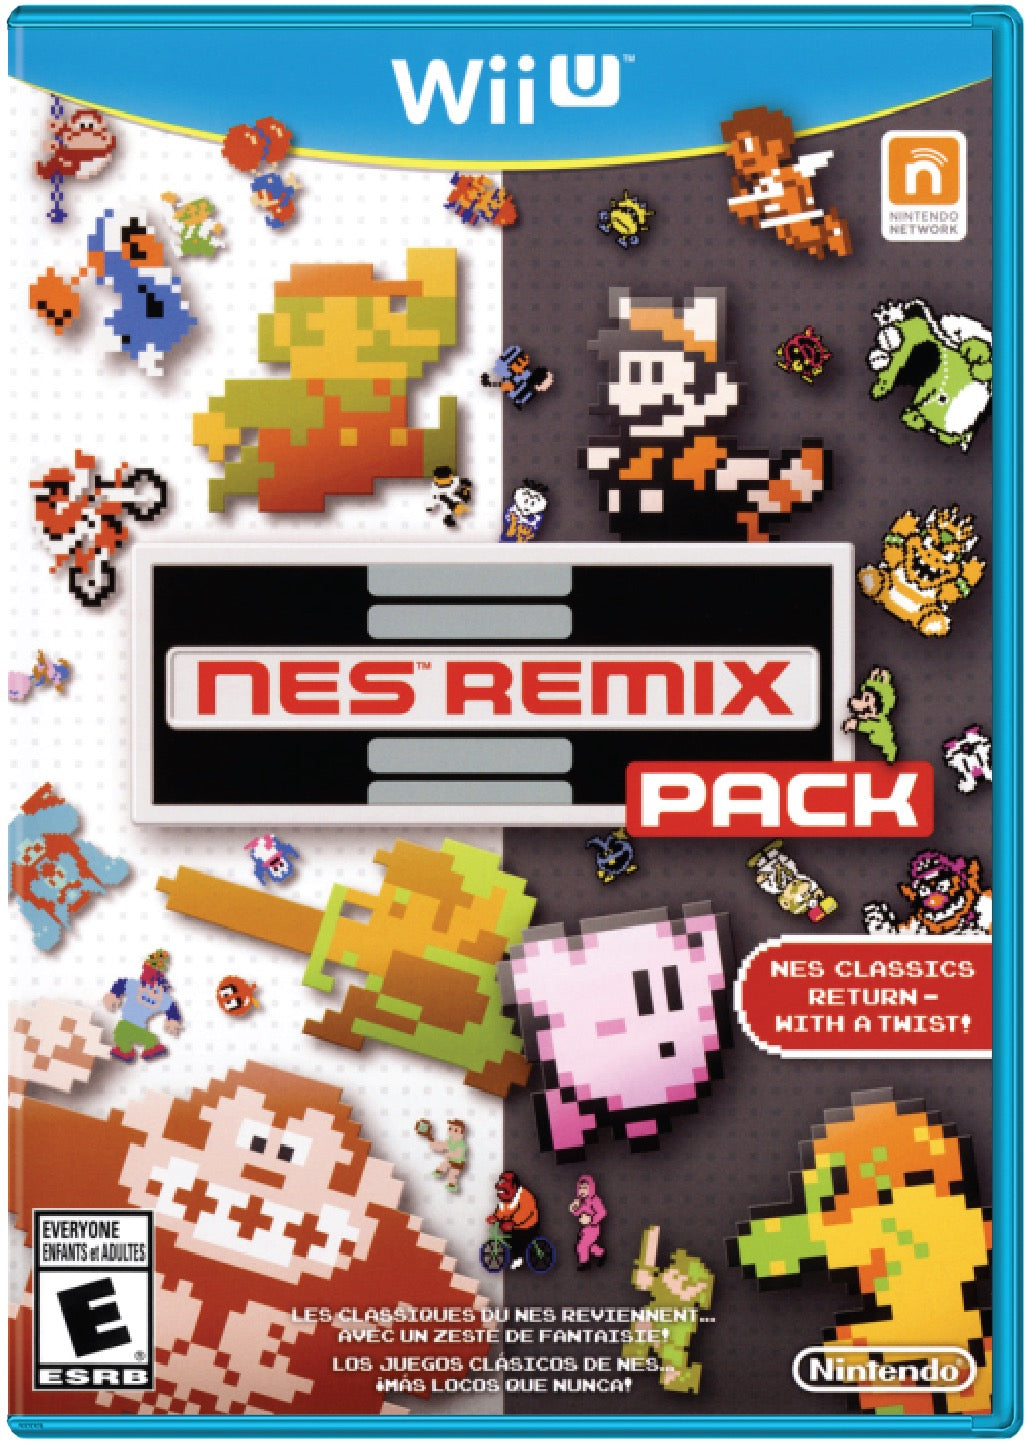 NES Remix Pack Cover Art and Product Photo